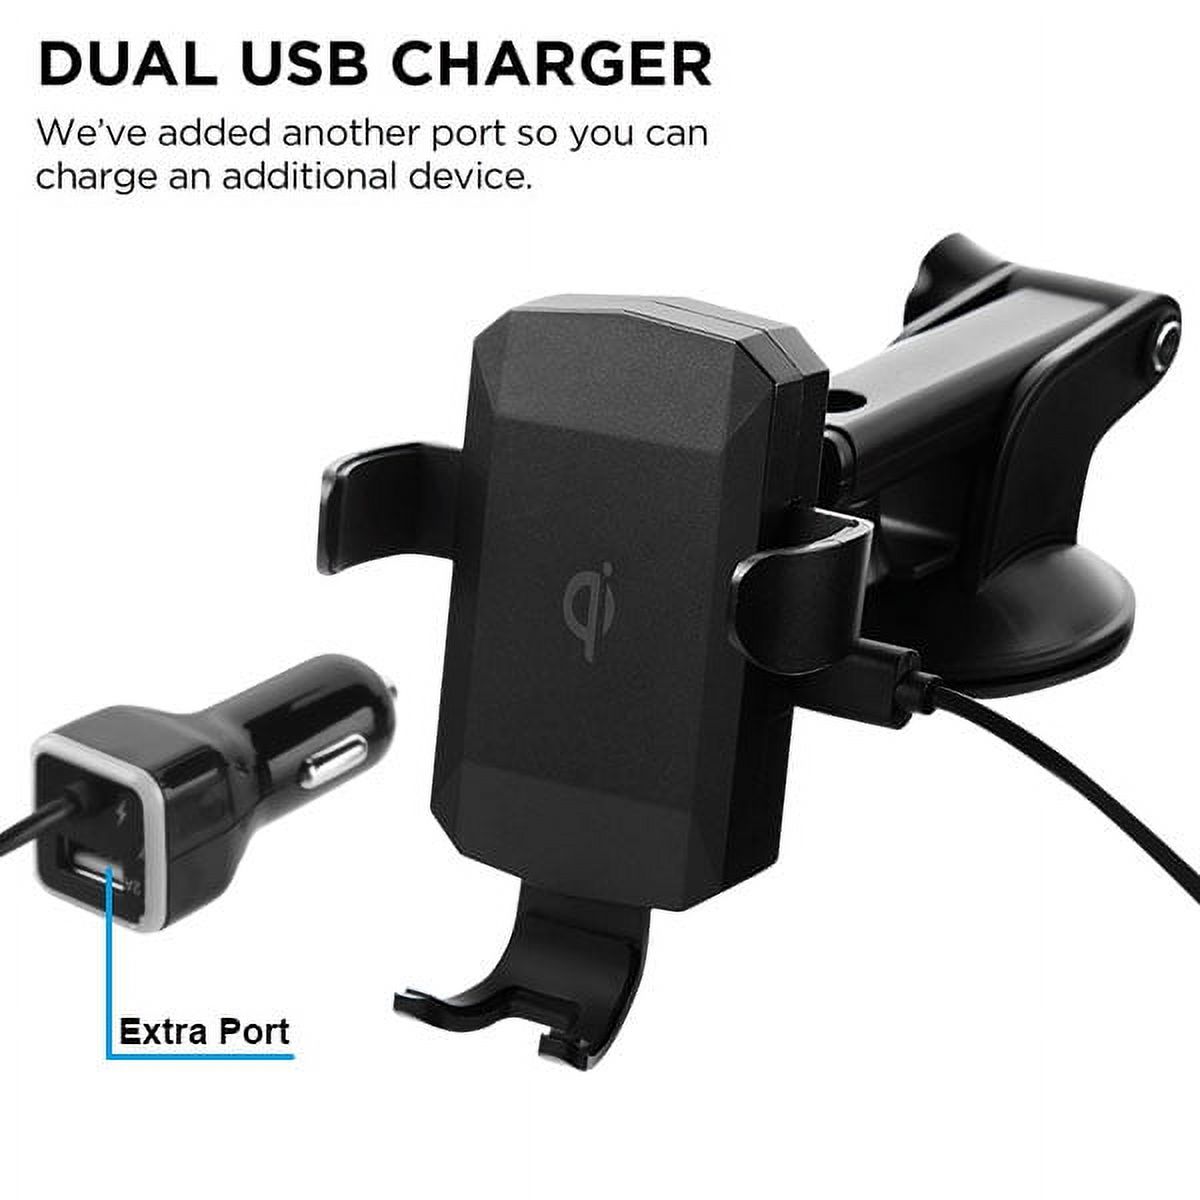 2-in-1 Wireless Charger and Suction Base Phone Mount for iPhone 12 Pro Max, 12, 12 Mini, 12 Pro, SE (2020), 11 Pro Max, 11 Pro, iPhone 11, Xs Max, Xs, Xs Plus, XR, X, 8, 8 Plus (Black) - image 2 of 7